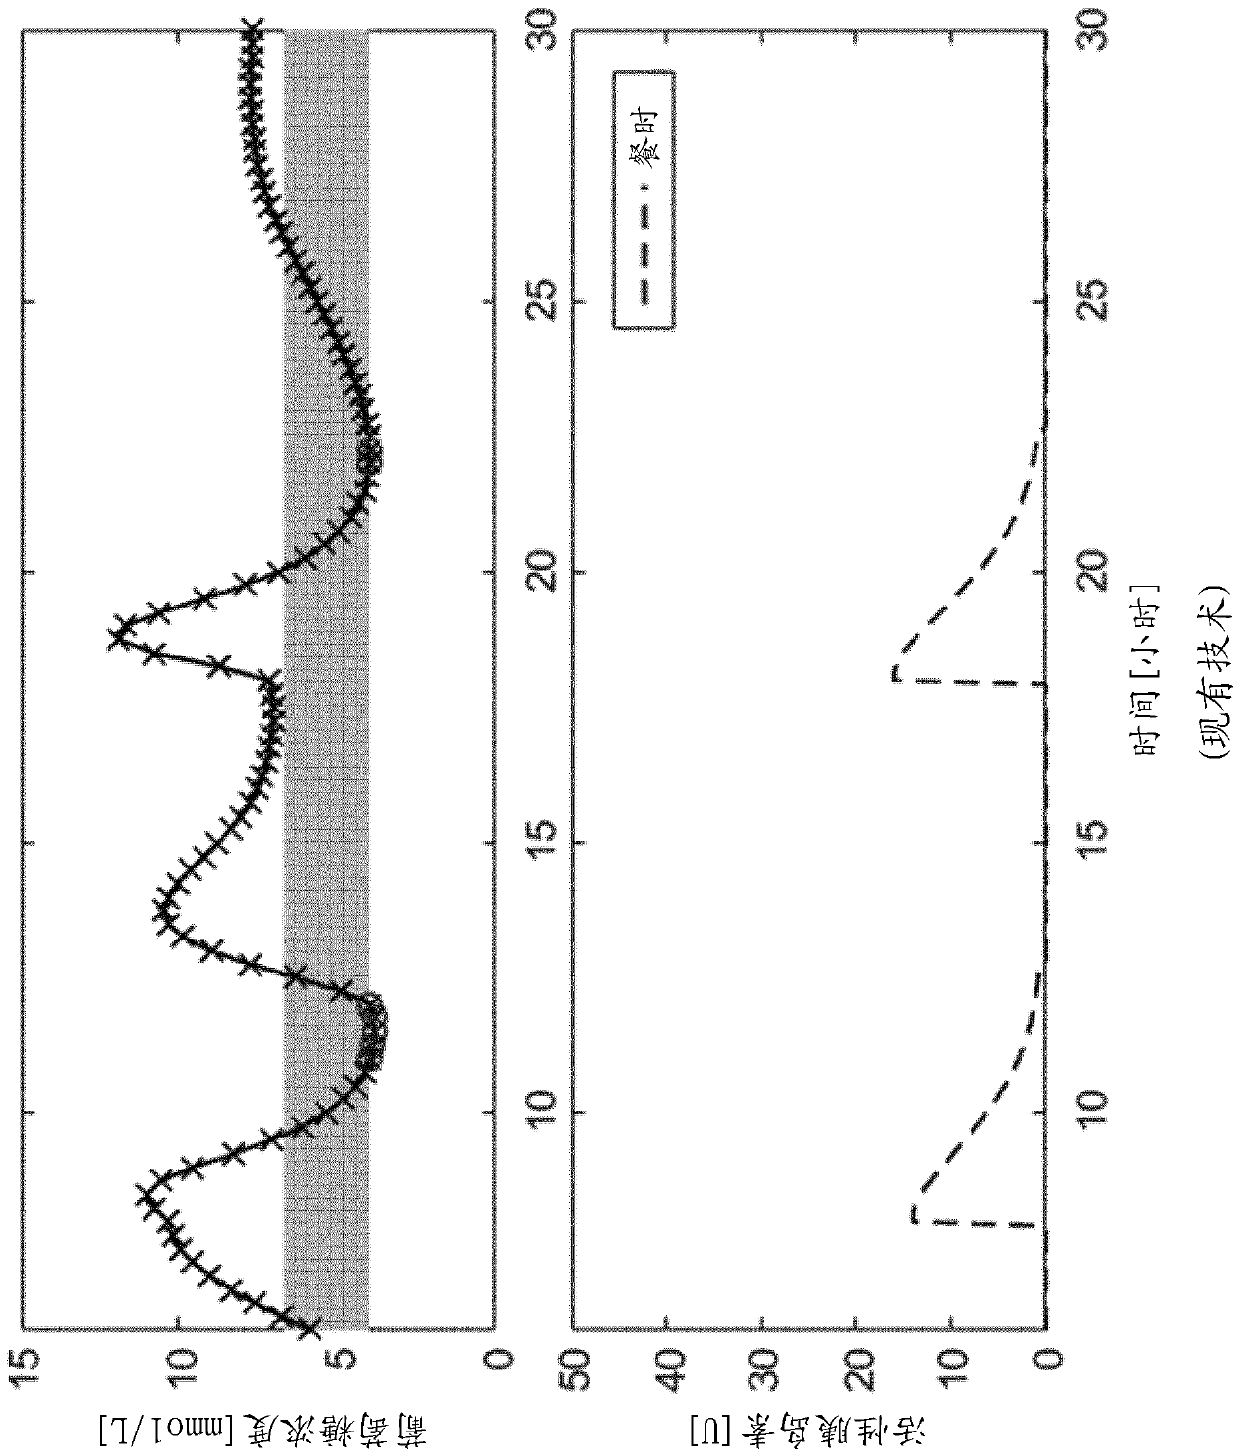 Systems and methods for optimization of bolus insulin medicament dosage for meal event